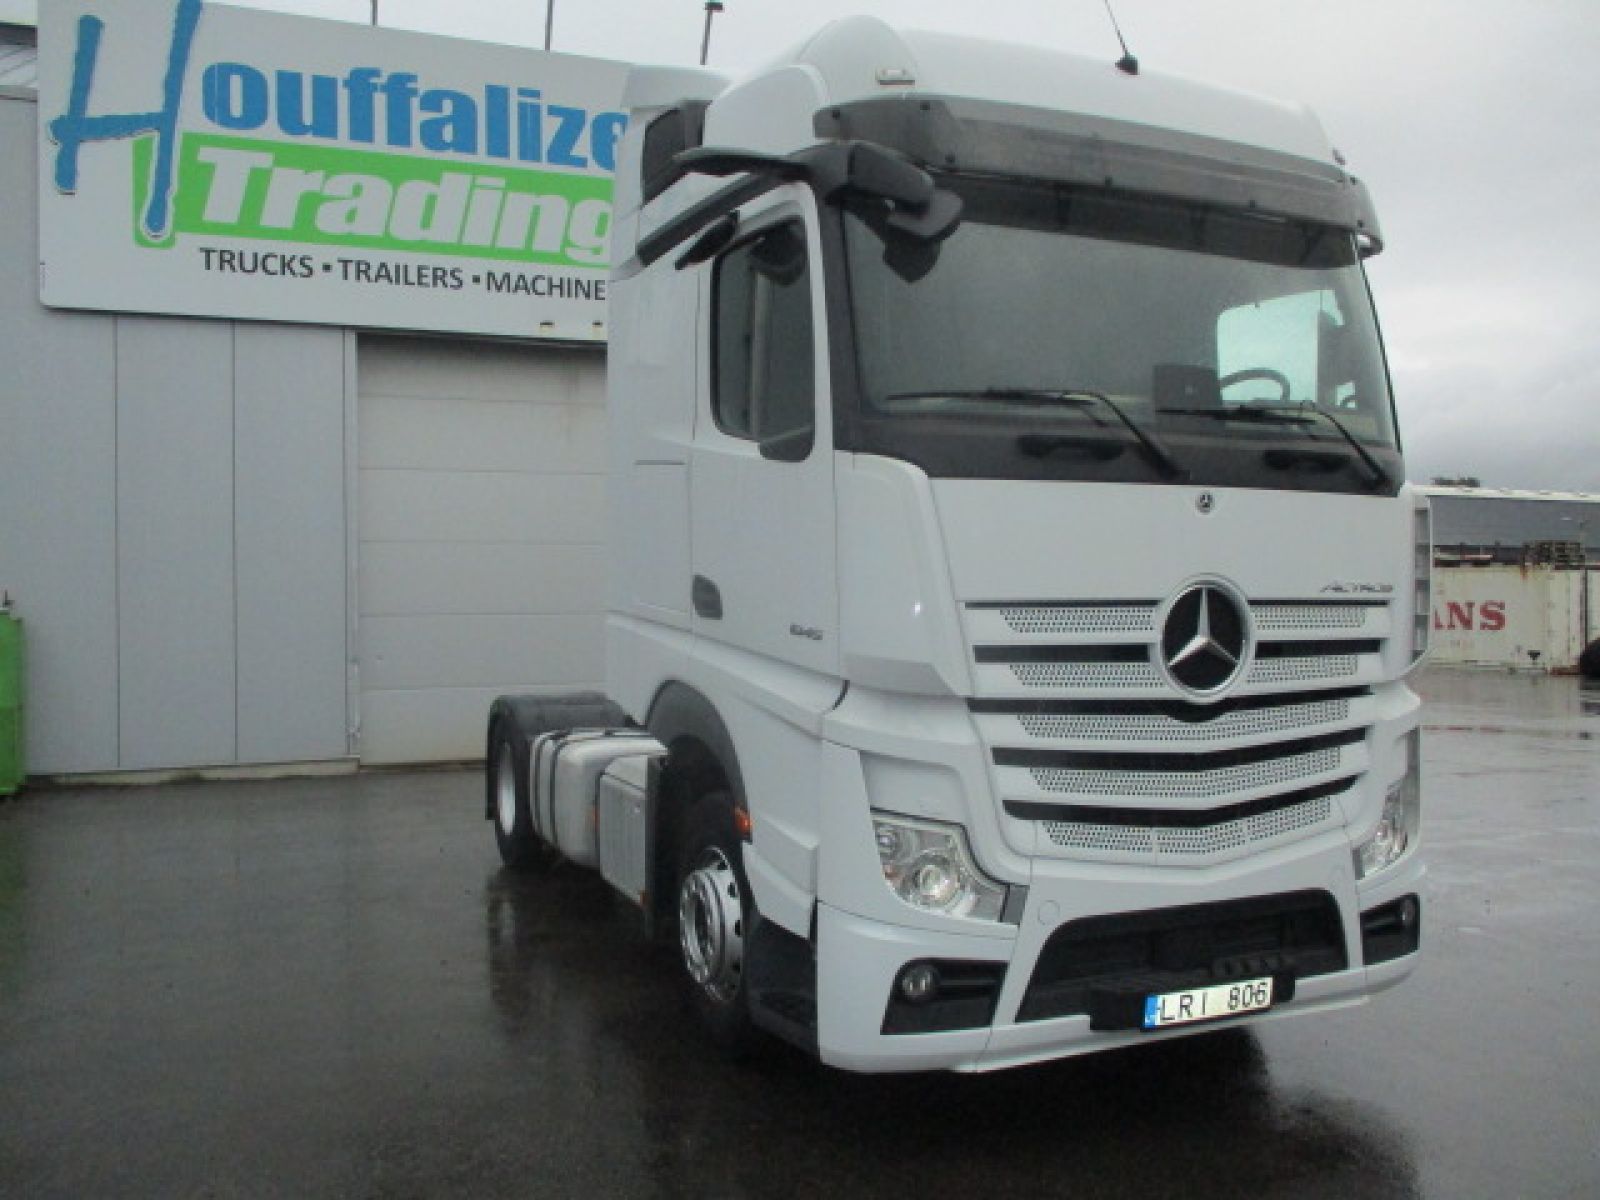  Unidades tractoras - MERCEDES ACTROS 1845  Tracteur (Belgique - Europe) - Houffalize Trading s.a.